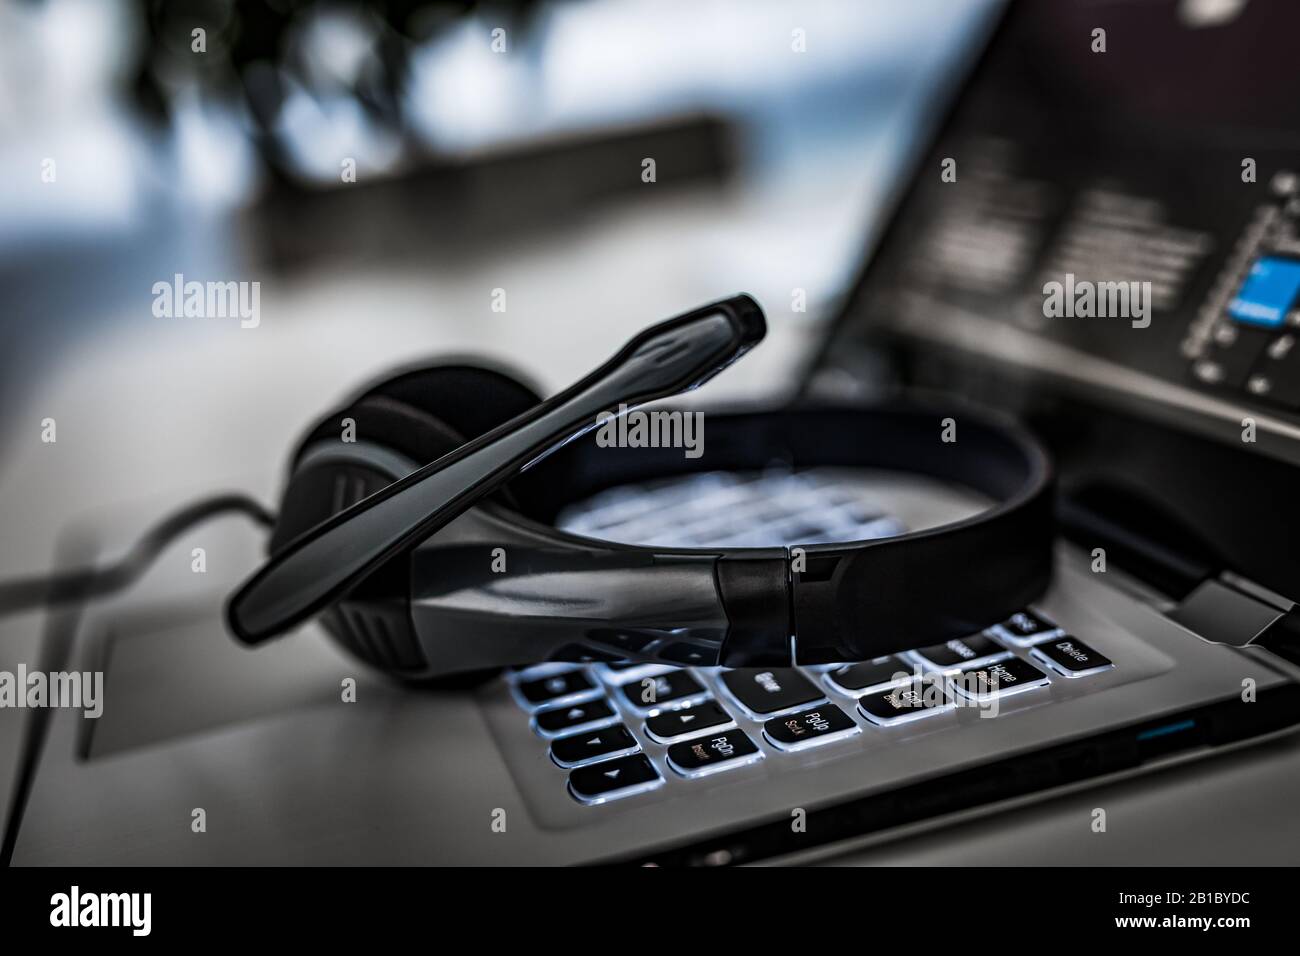 Communication support, call center and customer service help desk. VOIP headset on laptop computer keyboard. Stock Photo